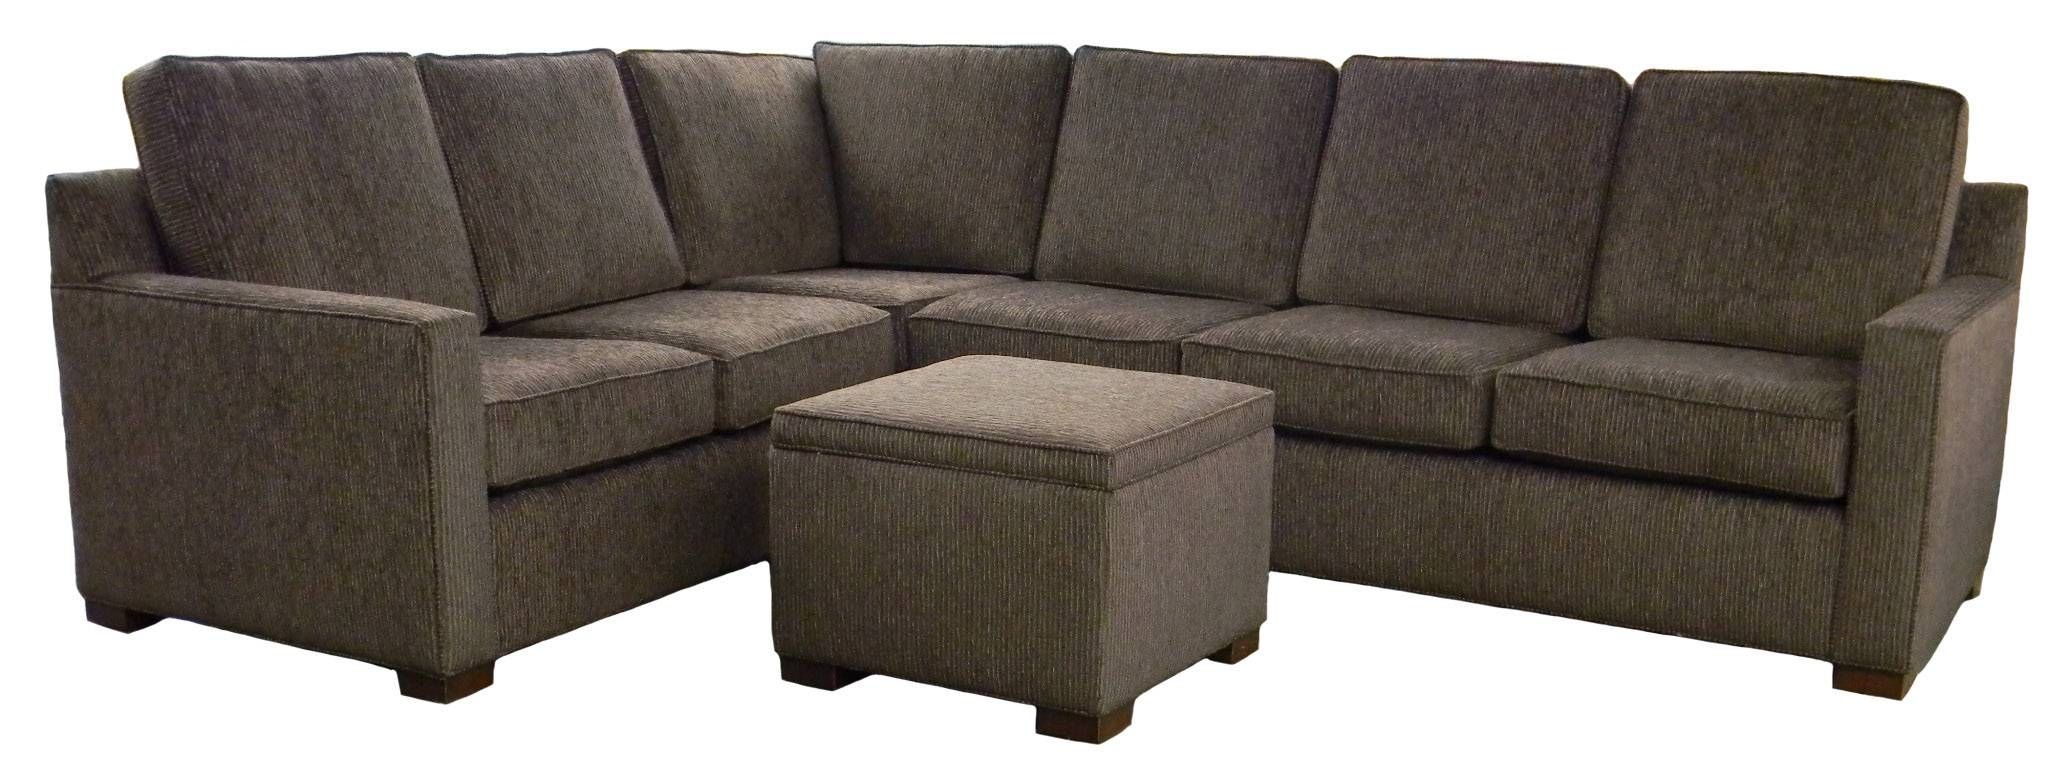 Cleanupflorida – Sectional Sofa Ideas Inside Short Sectional Sofas (View 10 of 15)